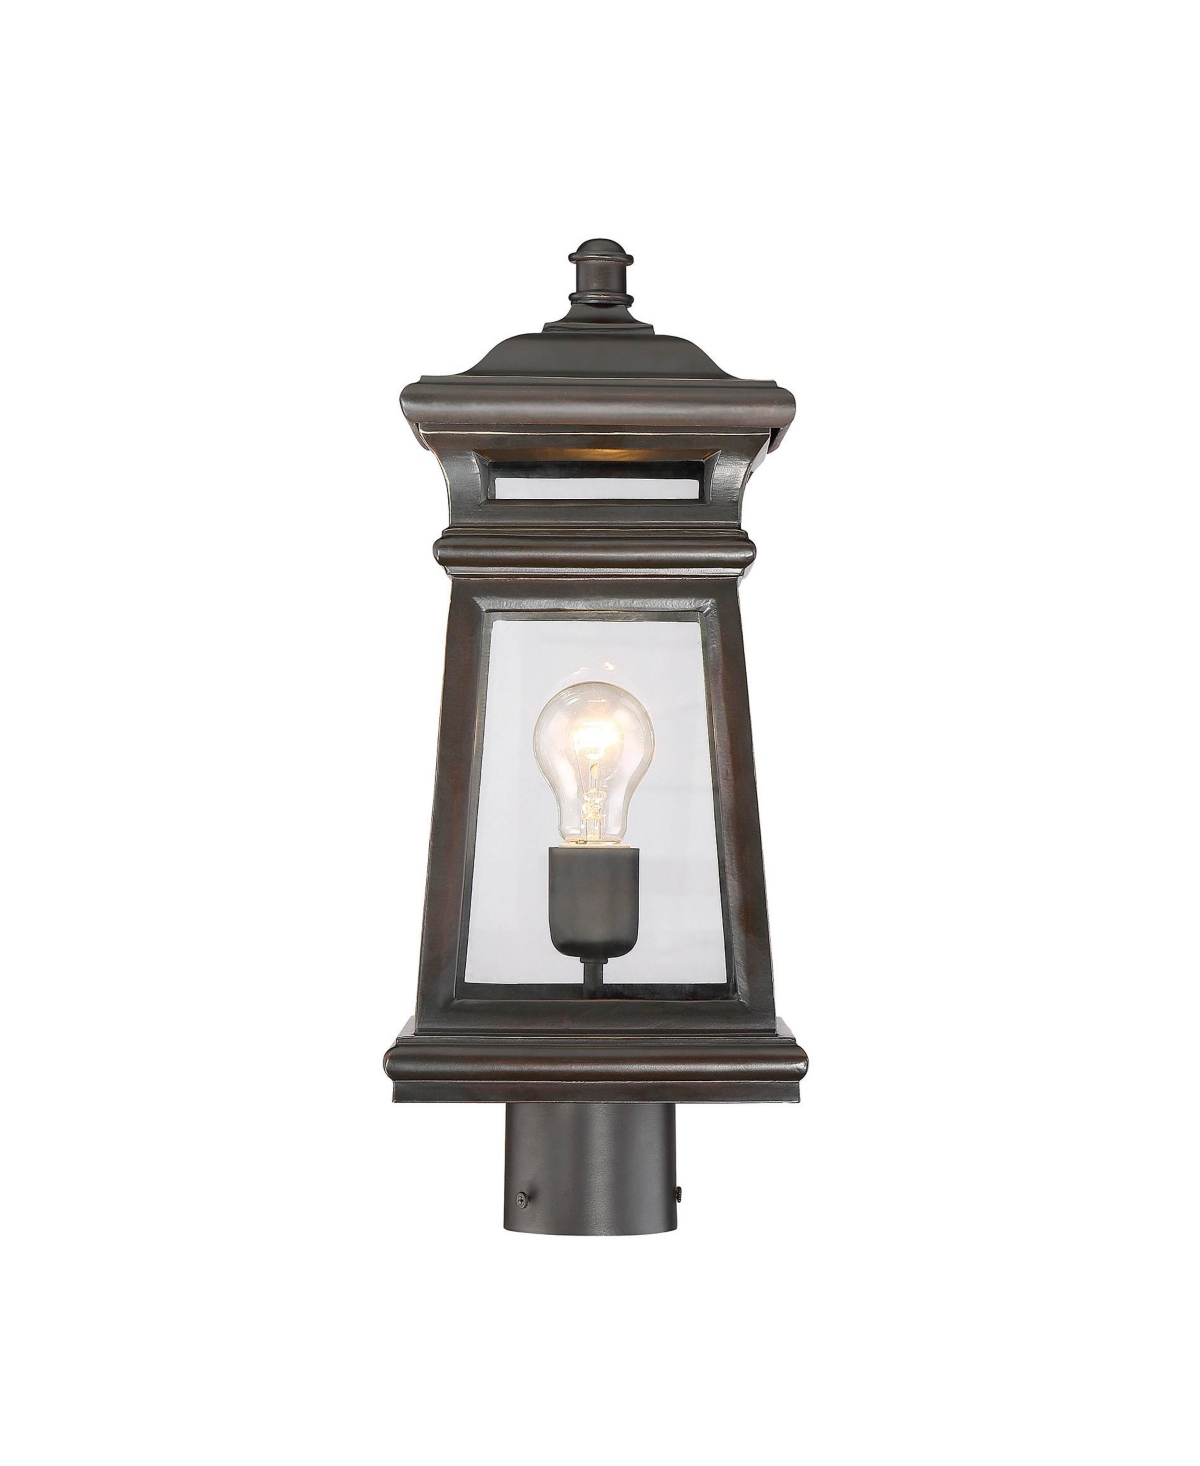 Taylor 1-Light Outdoor Post Lantern in English Bronze with Gold - English bronze/gold